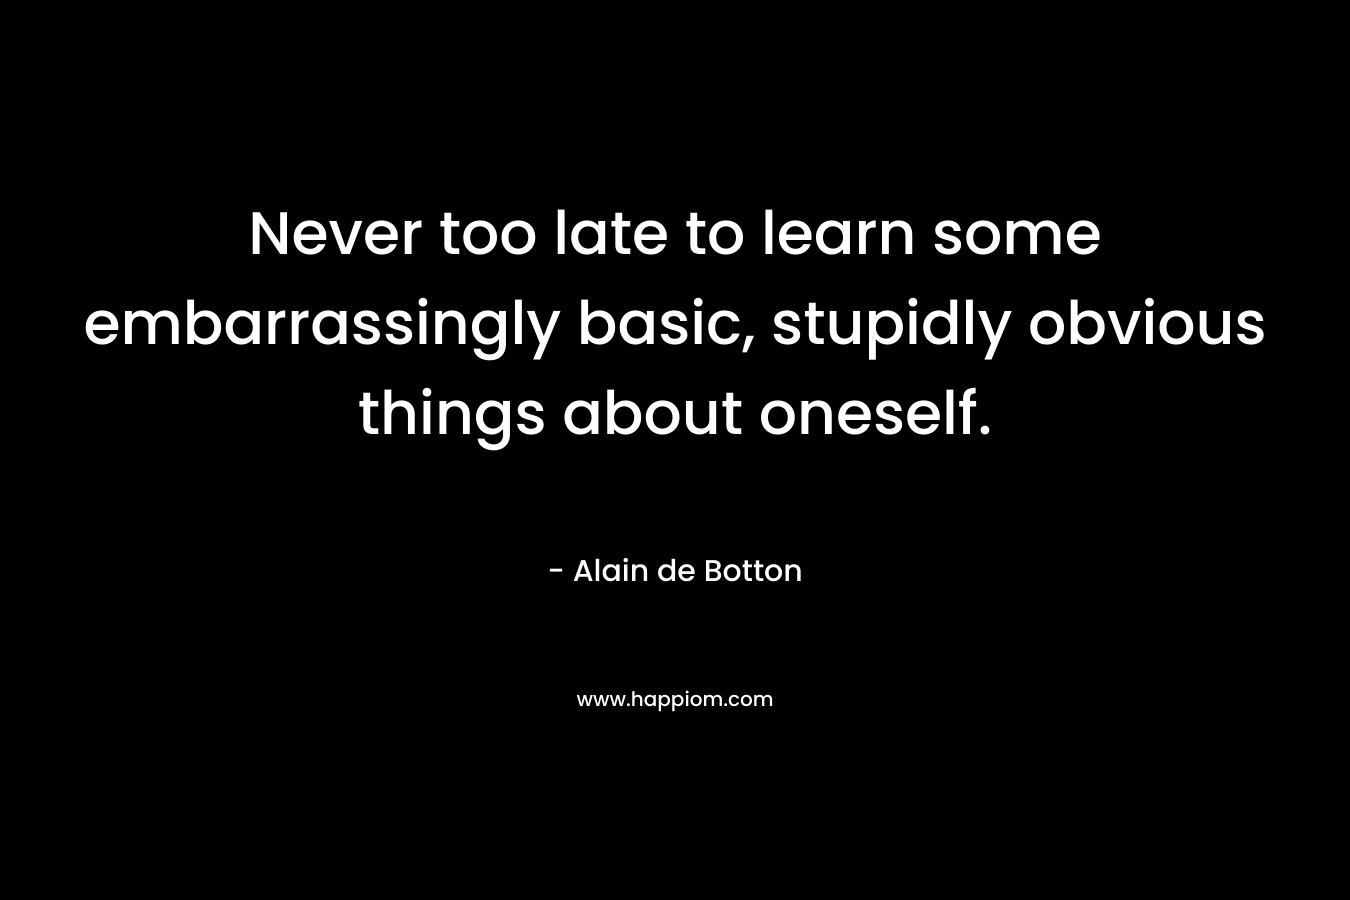 Never too late to learn some embarrassingly basic, stupidly obvious things about oneself.